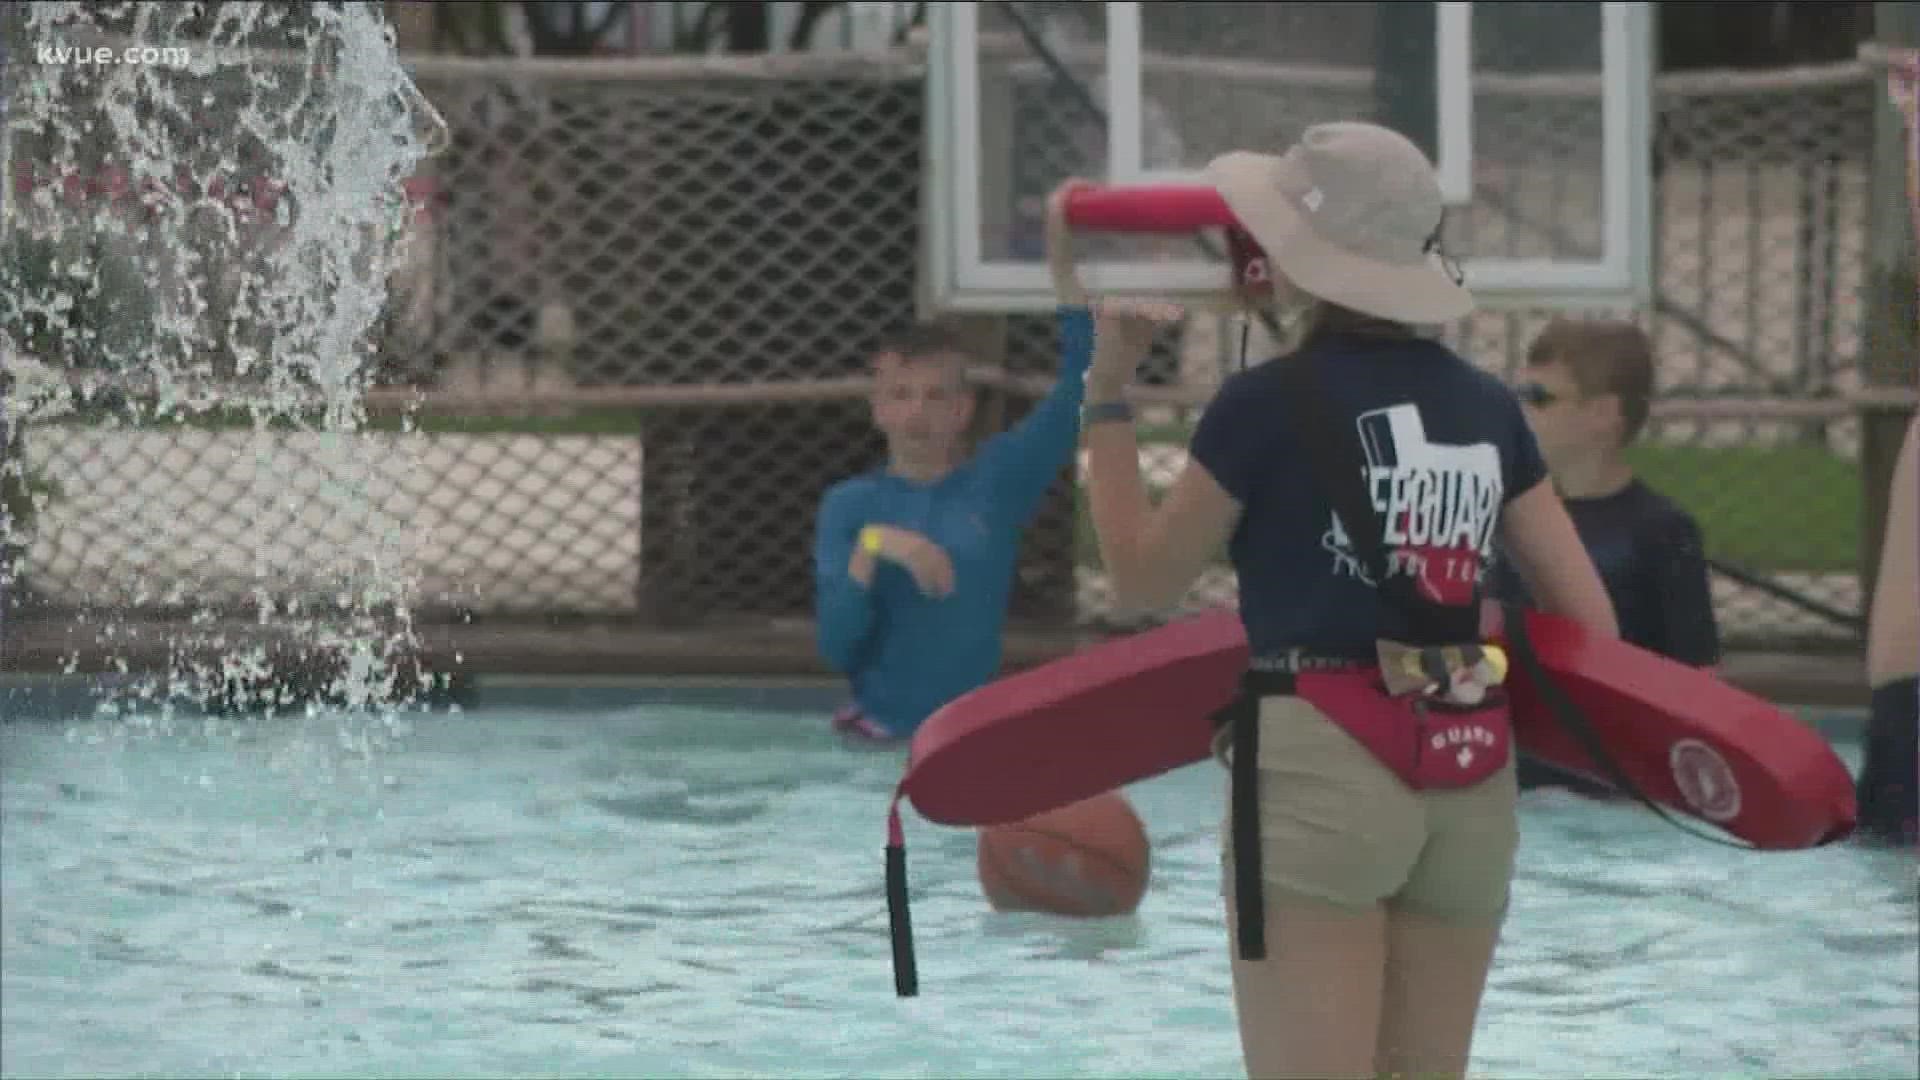 Austin City Council is expected to add incentives to attract new lifeguards and retain those already on staff.